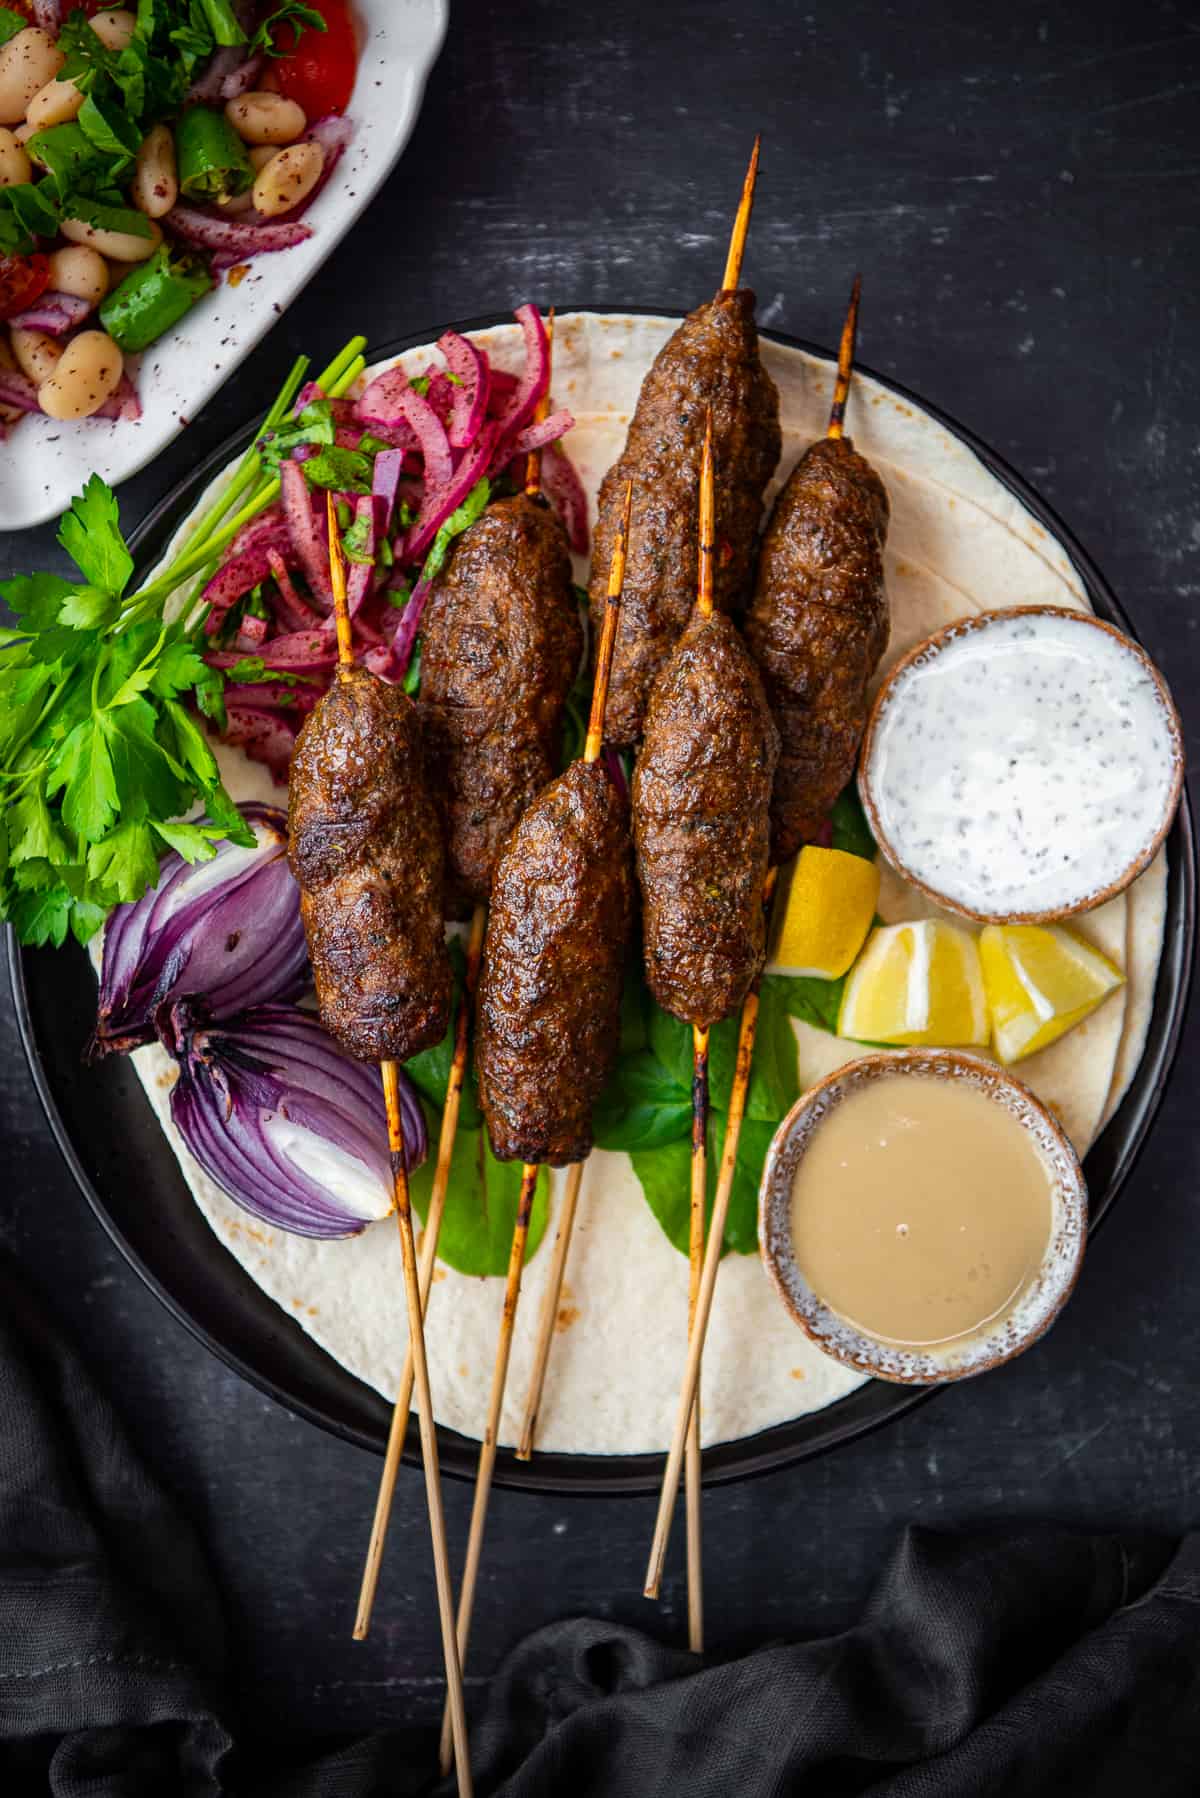 Kofta kebabs served with flat bread, parsley, onions and sauces on a plate.